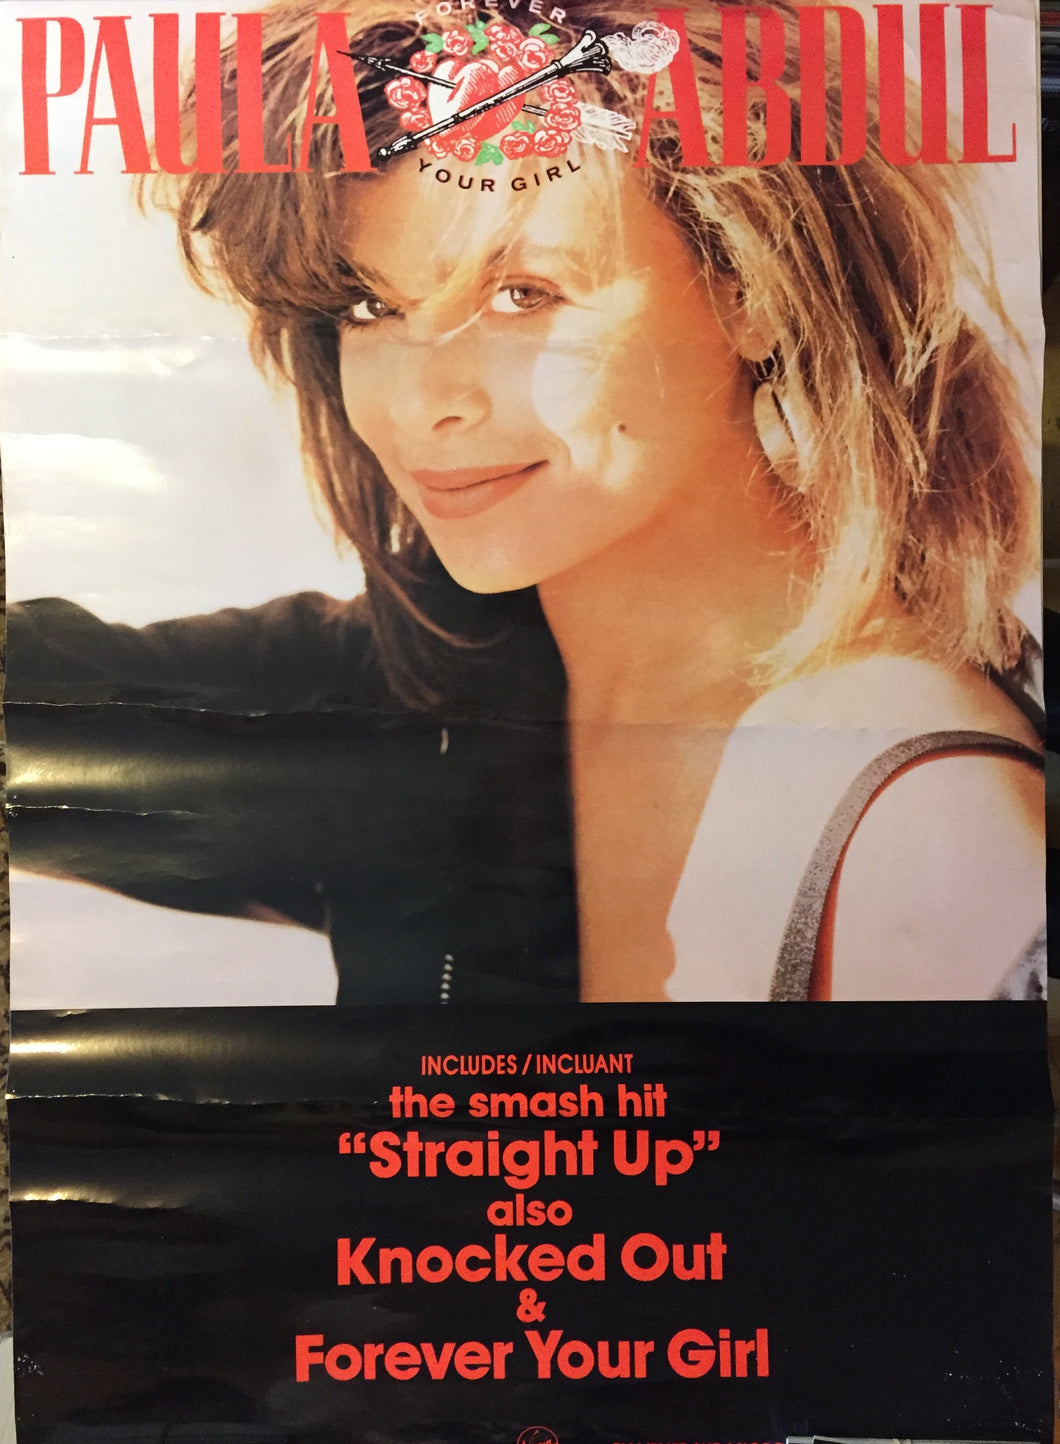 PAULA ABDUL - FOREVER YOUR GIRL (1988 USED) POSTER